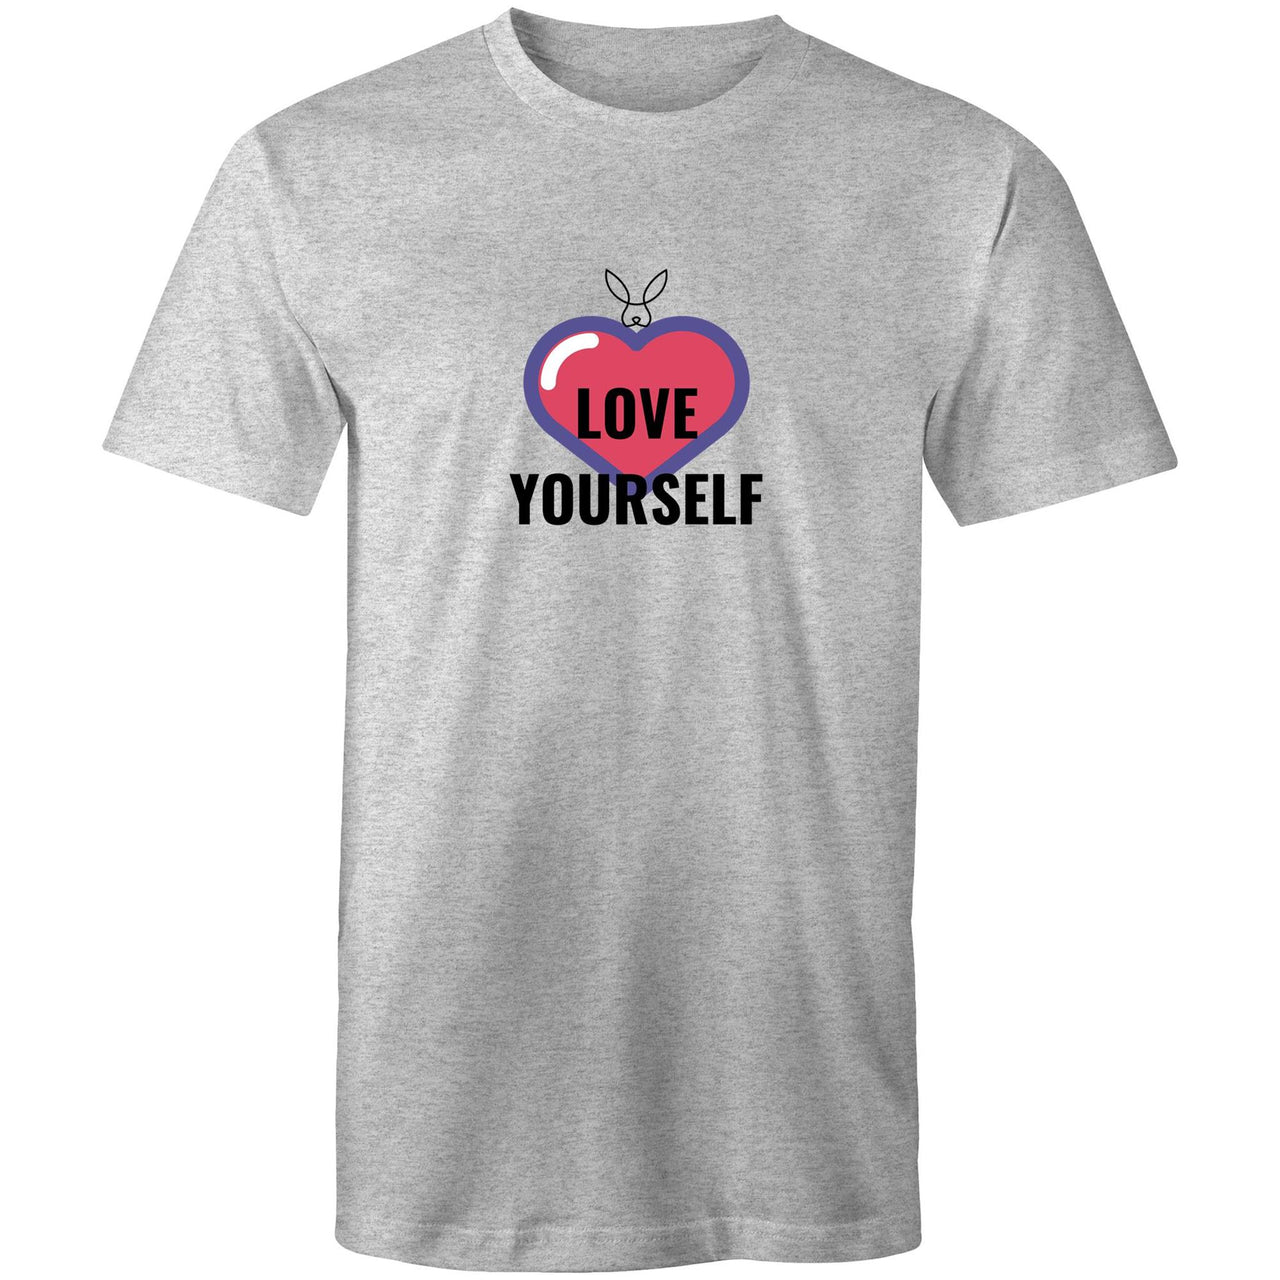 Love Yourself Crew T-Shirt by CBF Clothing grey